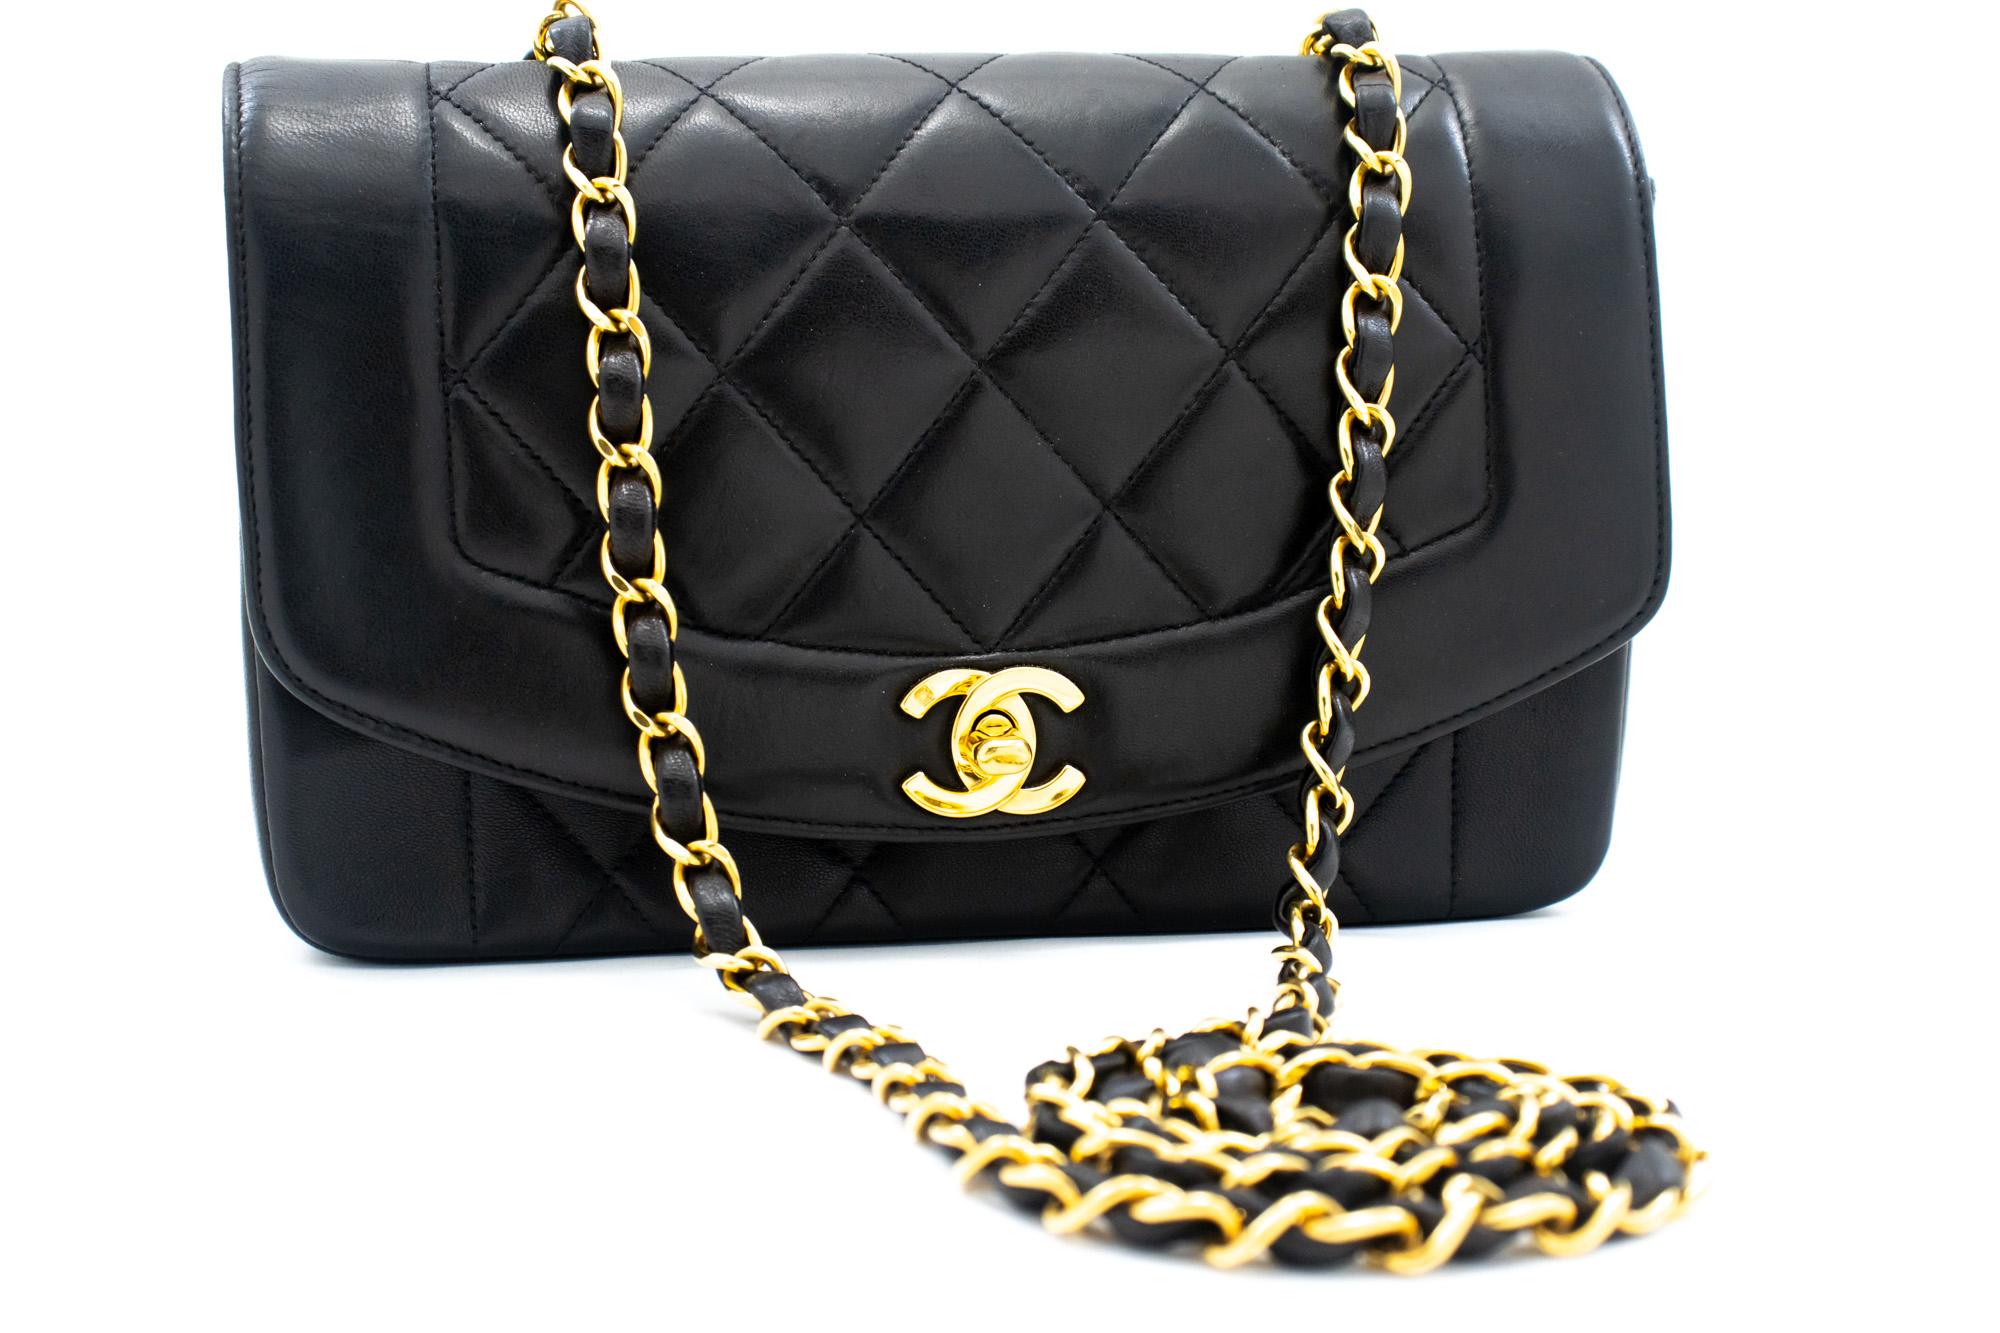 An authentic CHANEL Diana Flap Chain Shoulder Bag Black Quilted made of black Lambskin Purse. The color is Black. The outside material is Leather. The pattern is Solid. This item is Vintage / Classic. The year of manufacture would be